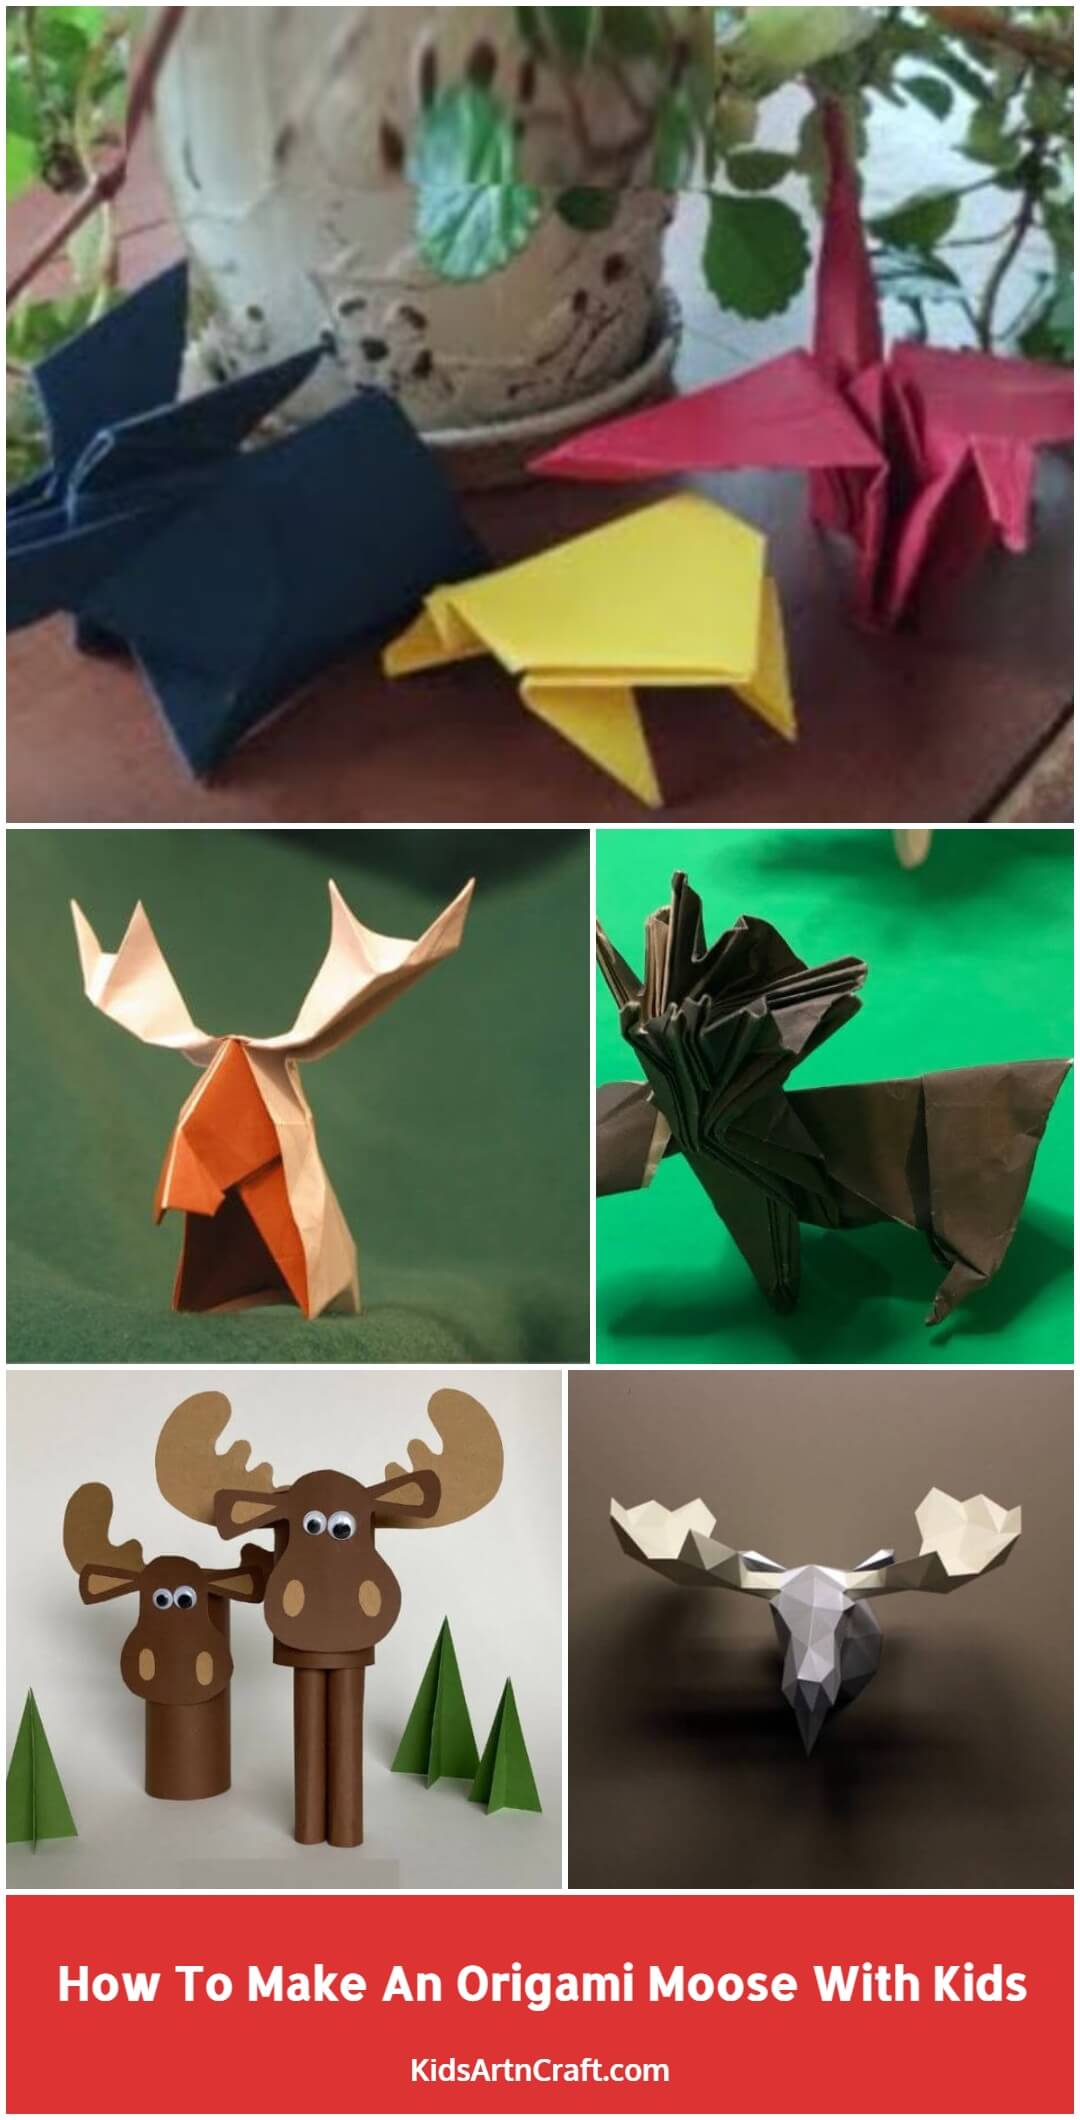 How To Make An Origami Moose With Kids